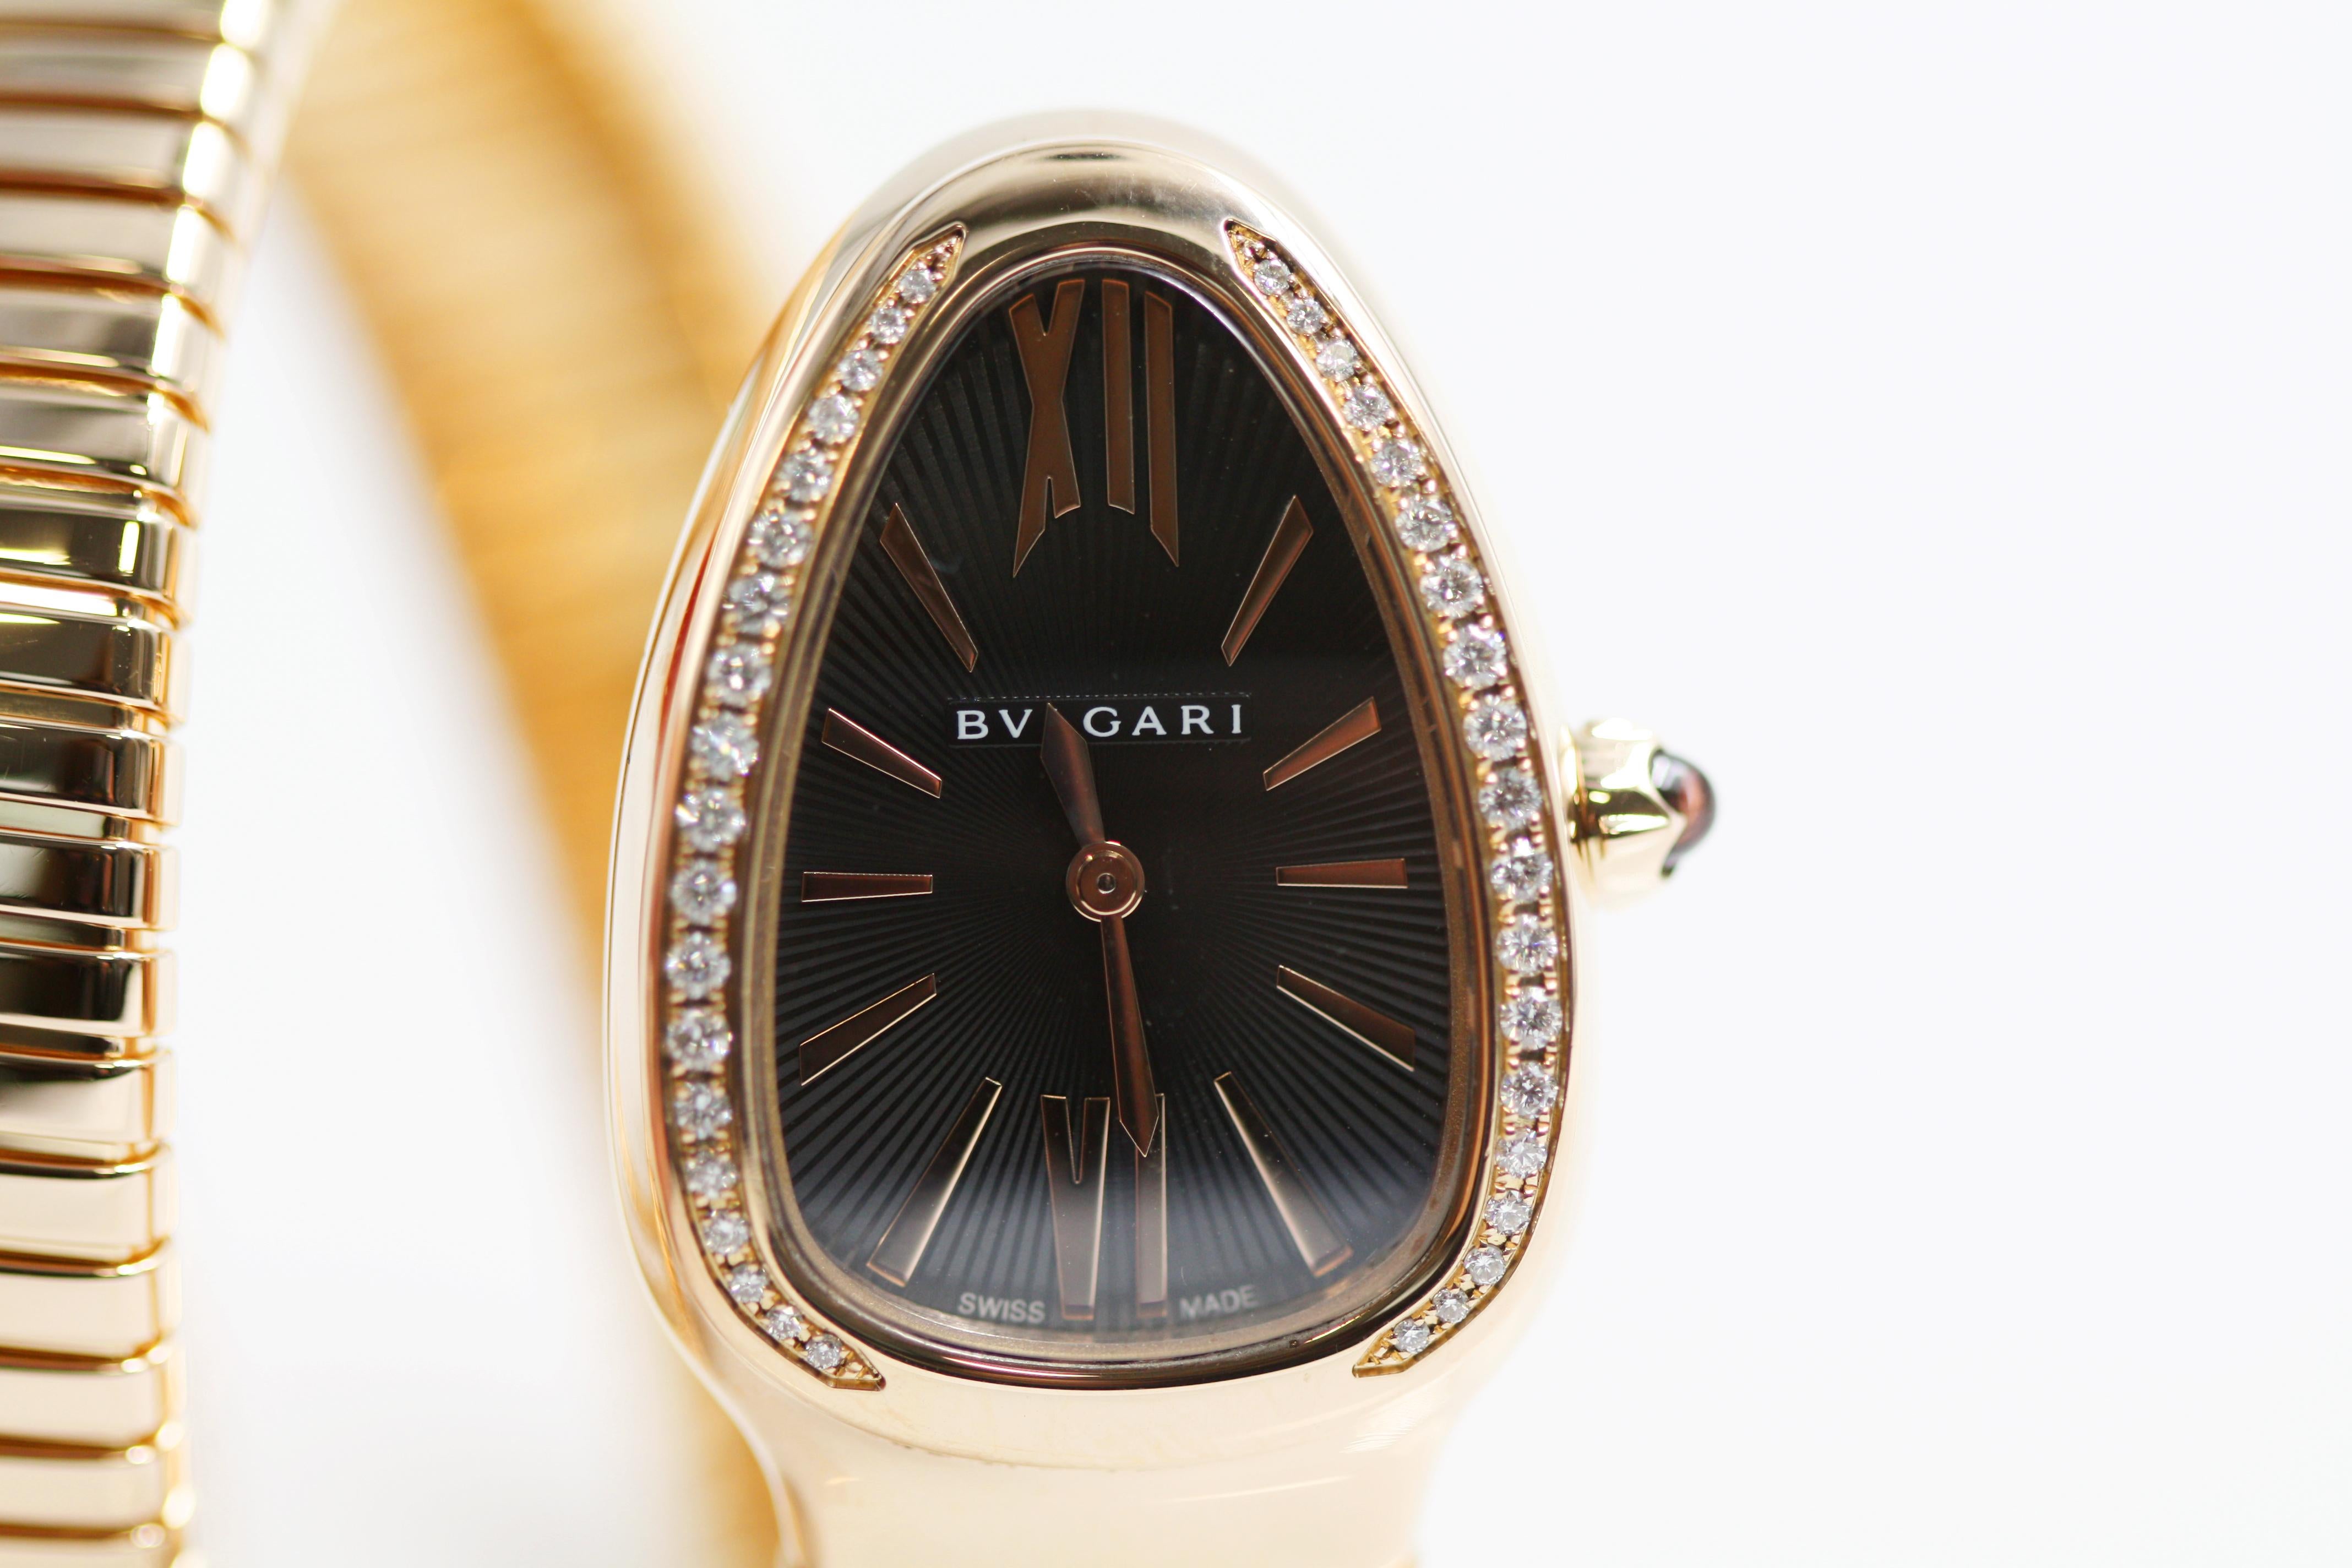 Serpenti Tubogas double spiral watch with 18 kt rose gold case set with brilliant cut diamonds, black opaline dial and 18 kt rose gold bracelet.

Merging two of the most iconic symbols of Bulgari design, the Serpenti Tubogas watch coils the